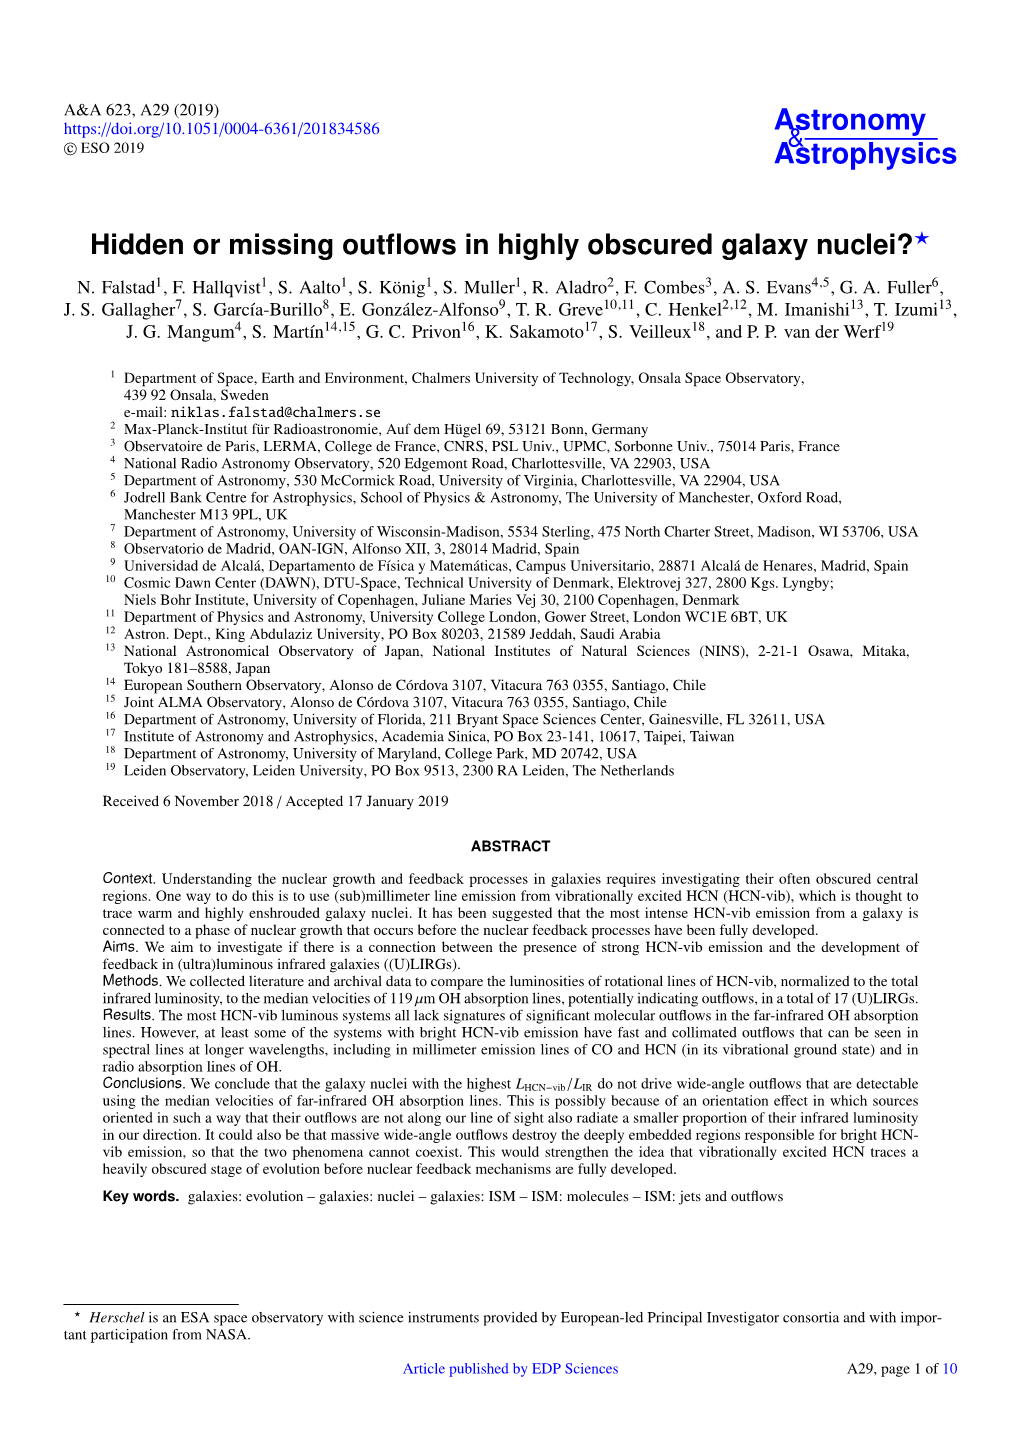 Hidden Or Missing Outflows in Highly Obscured Galaxy Nuclei?